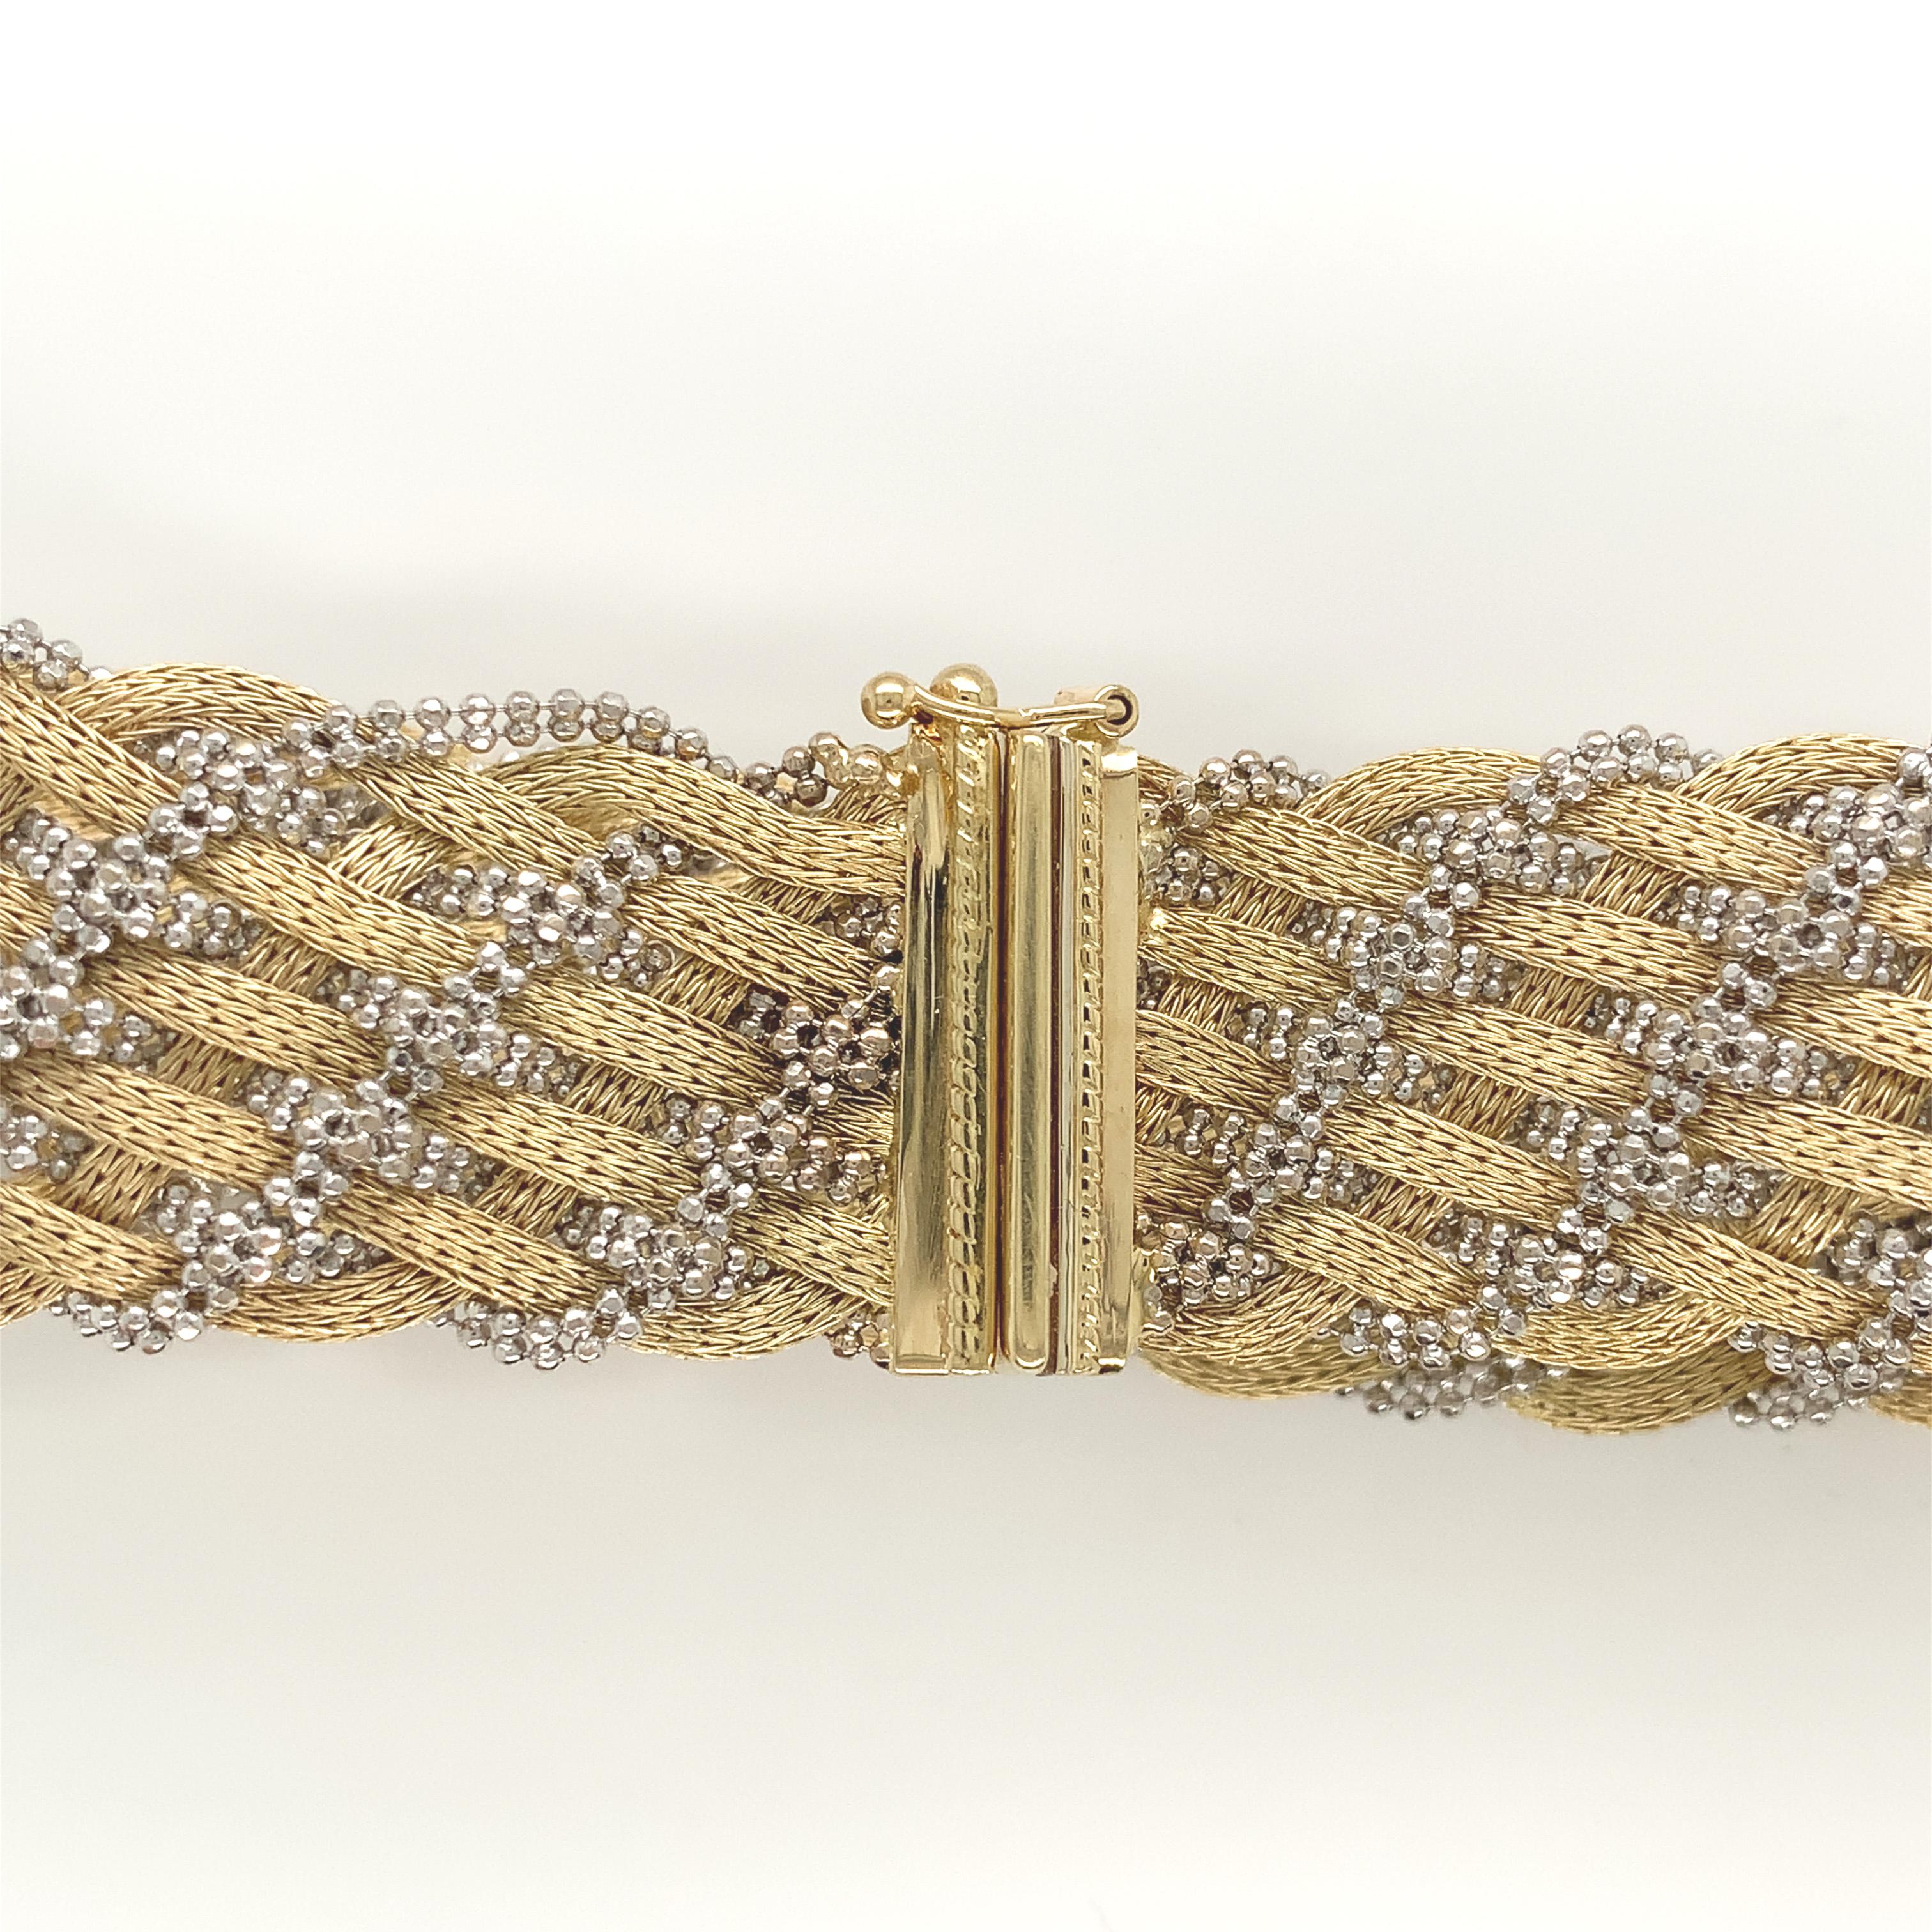 14K Yellow and White gold bracelet made in Italy by Carlo Rezzadore. There are fancy chains in a basket weave type pattern. The bracelet measures 3/4